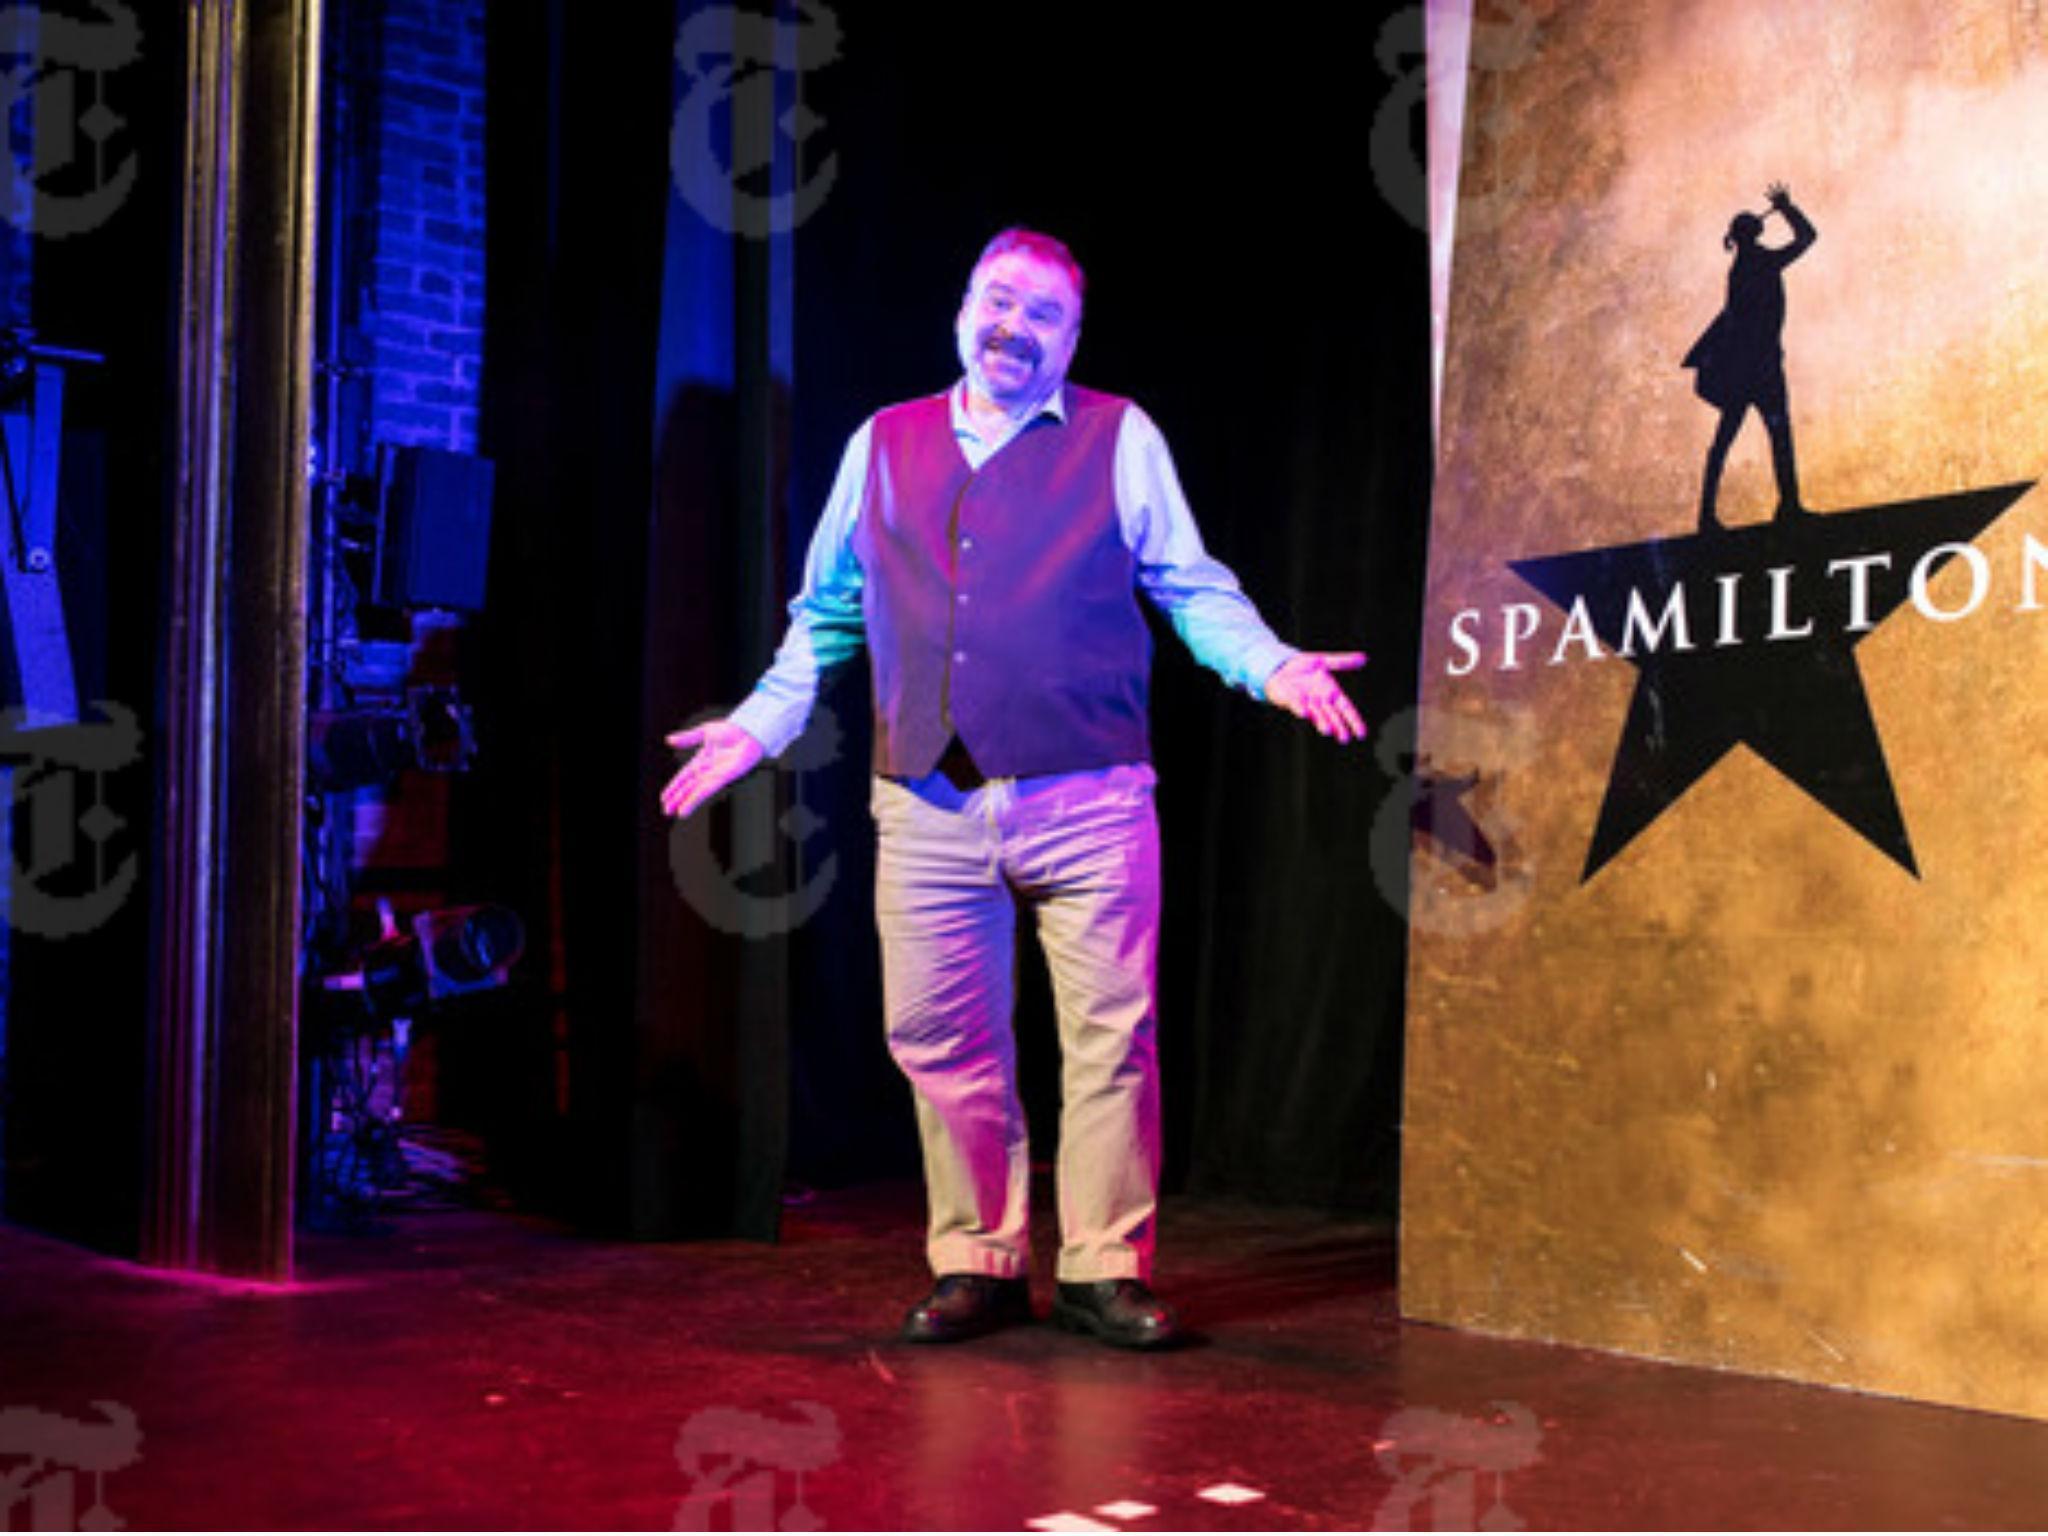 'Spamilton's' Gerard Alessandrini said his spoof is paying homage to 'Hamilton', the blockbuster Broadway musical, by mocking it in a good way